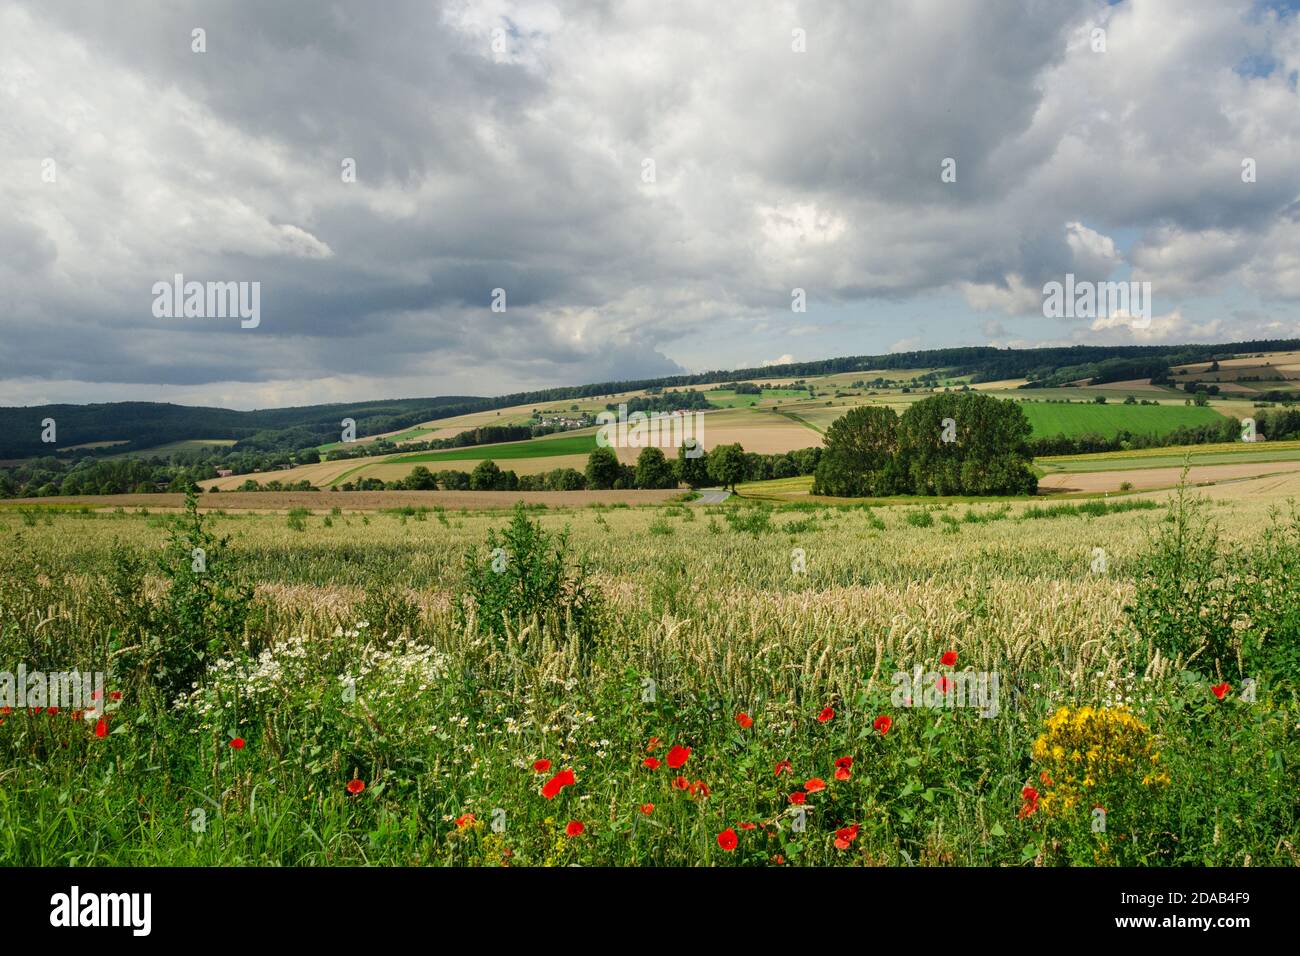 Hills with field of wild flowers near Hanover - München, Germany Stock Photo